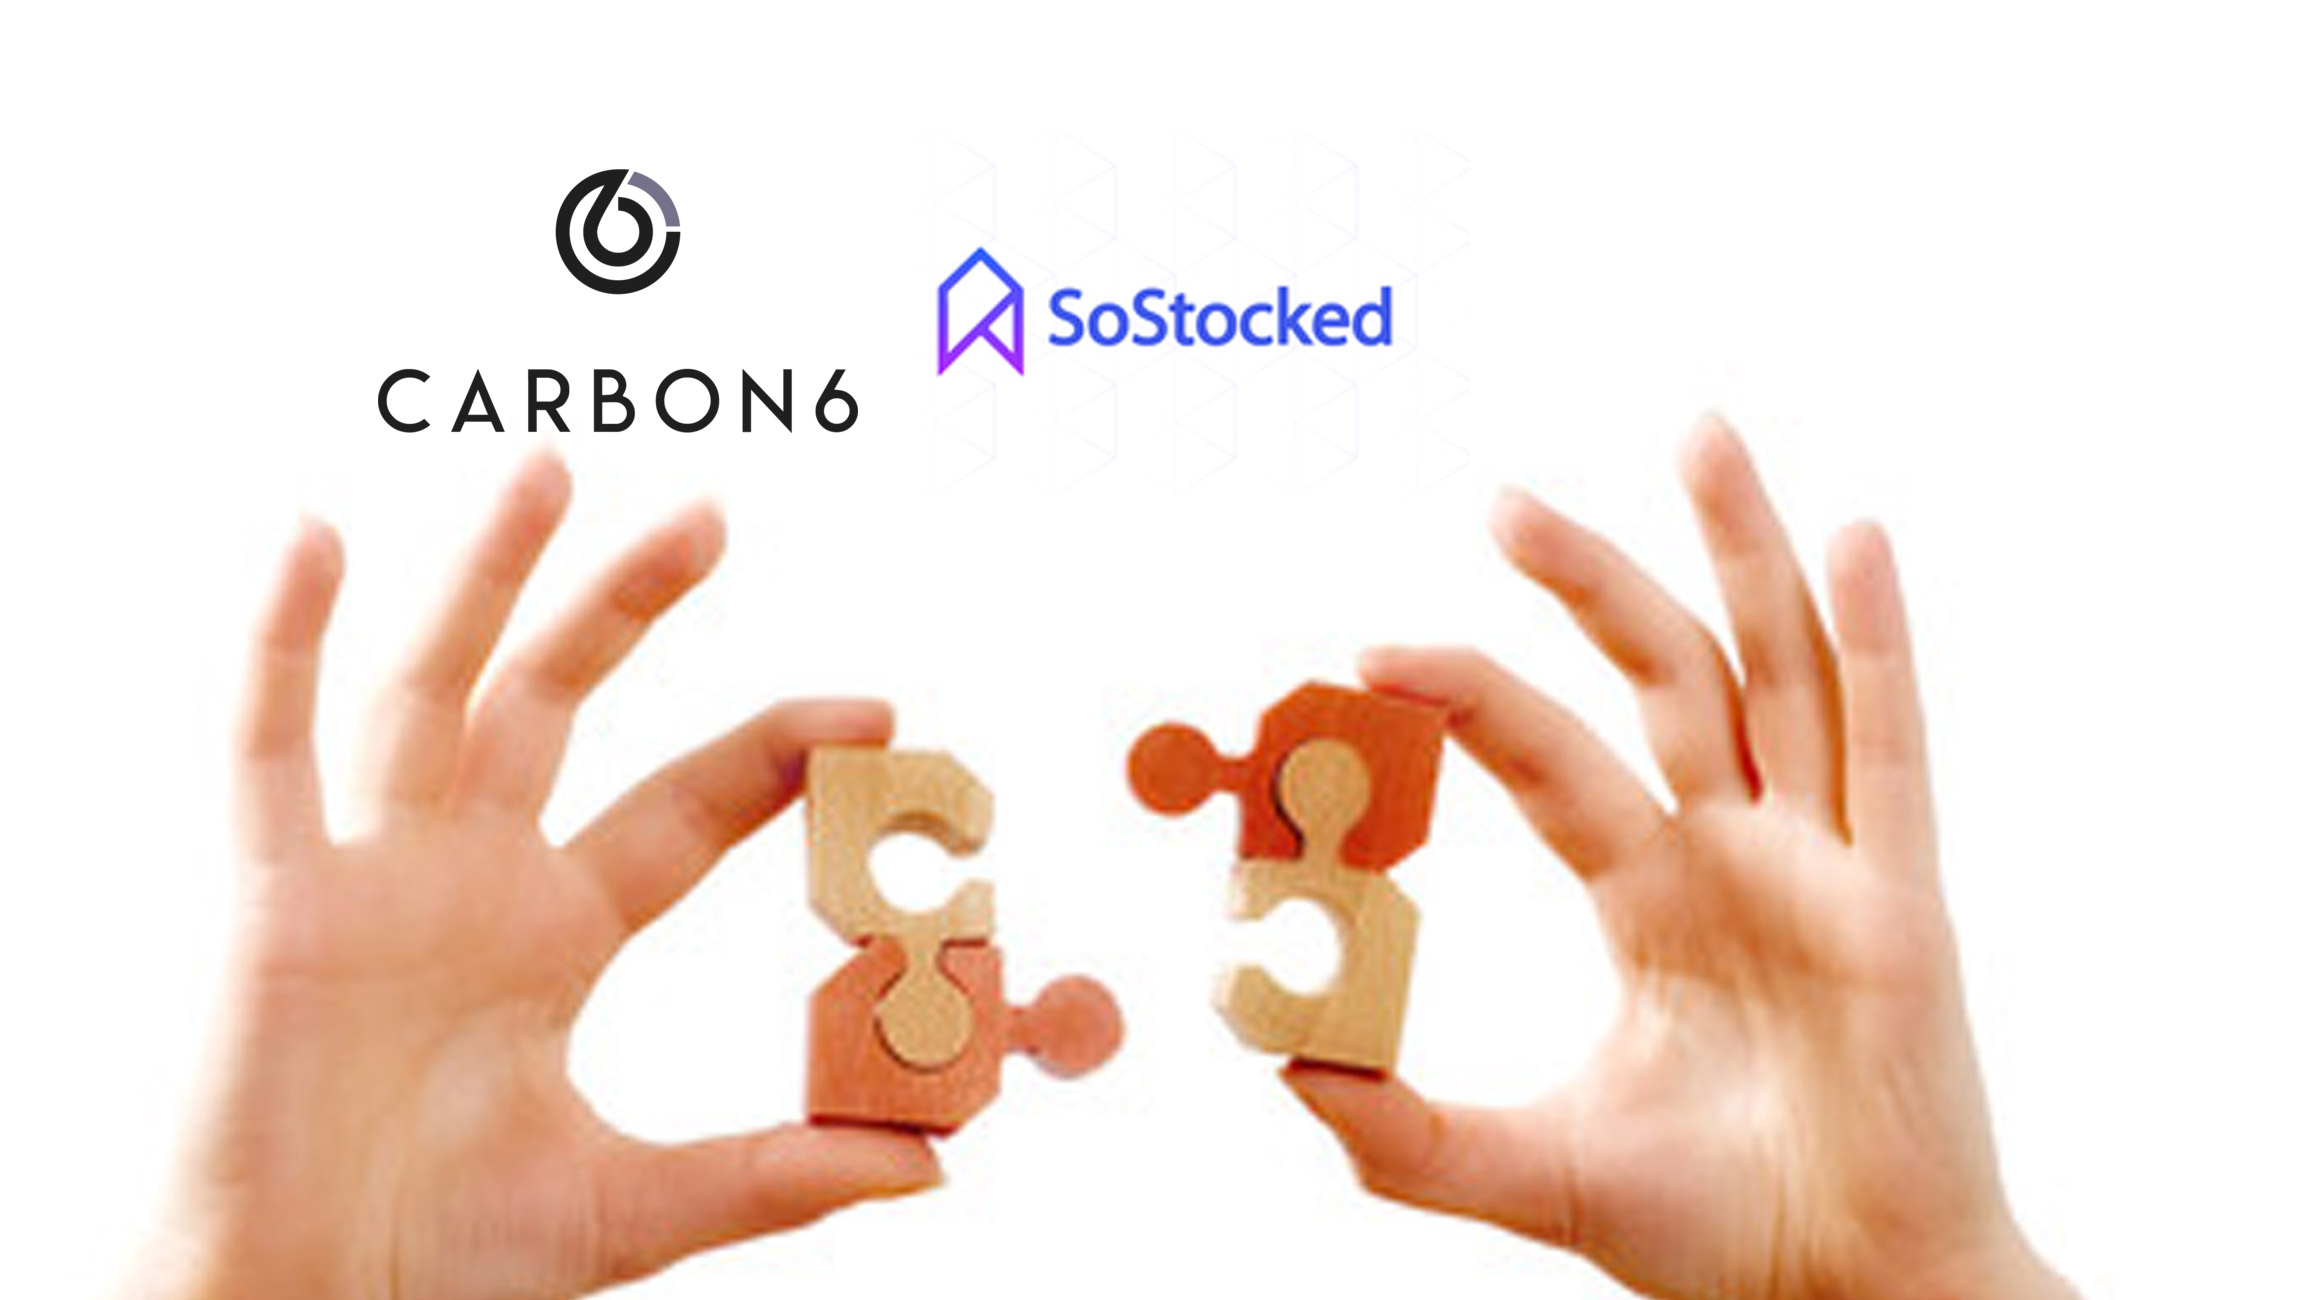 Carbon6 Acquires SoStocked, the Leading Inventory Management Tool for Amazon Sellers